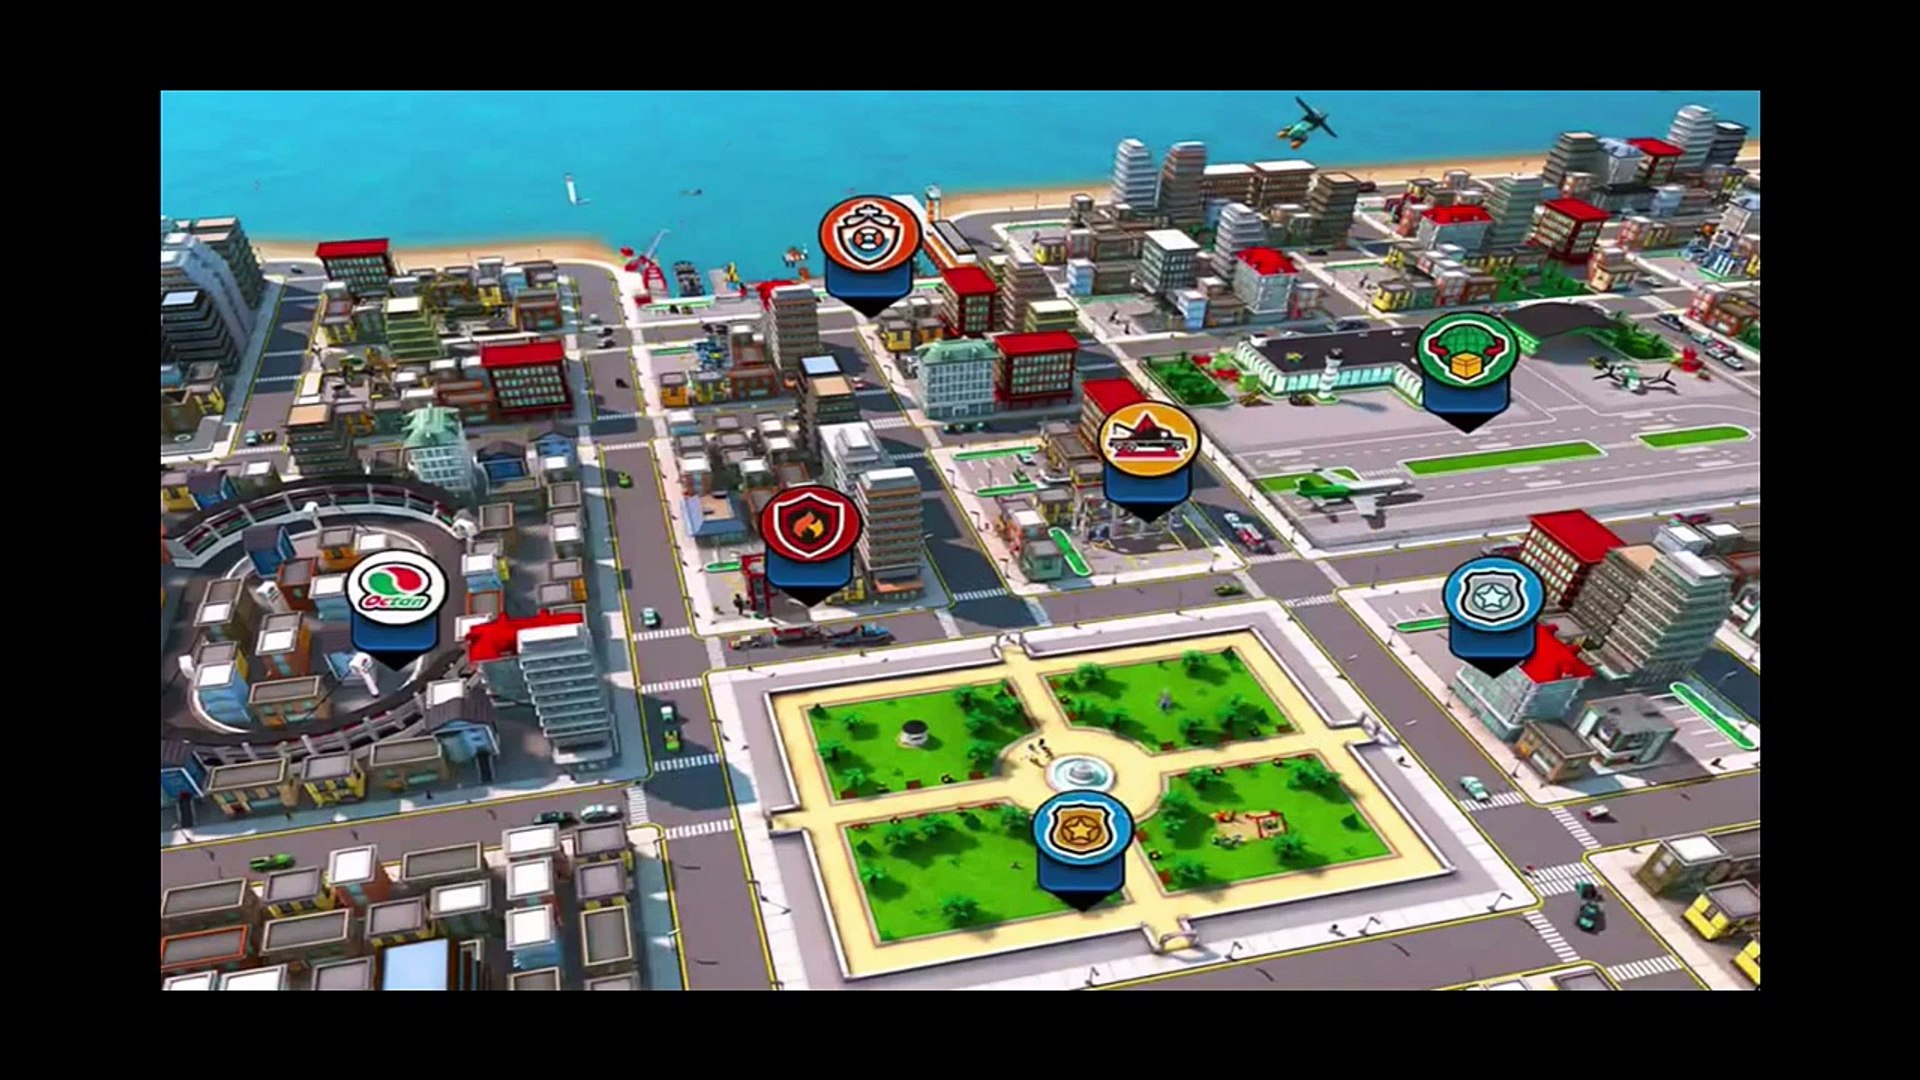 LEGO City My City - Free Game / Gameplay Review for iOS: / iPad -